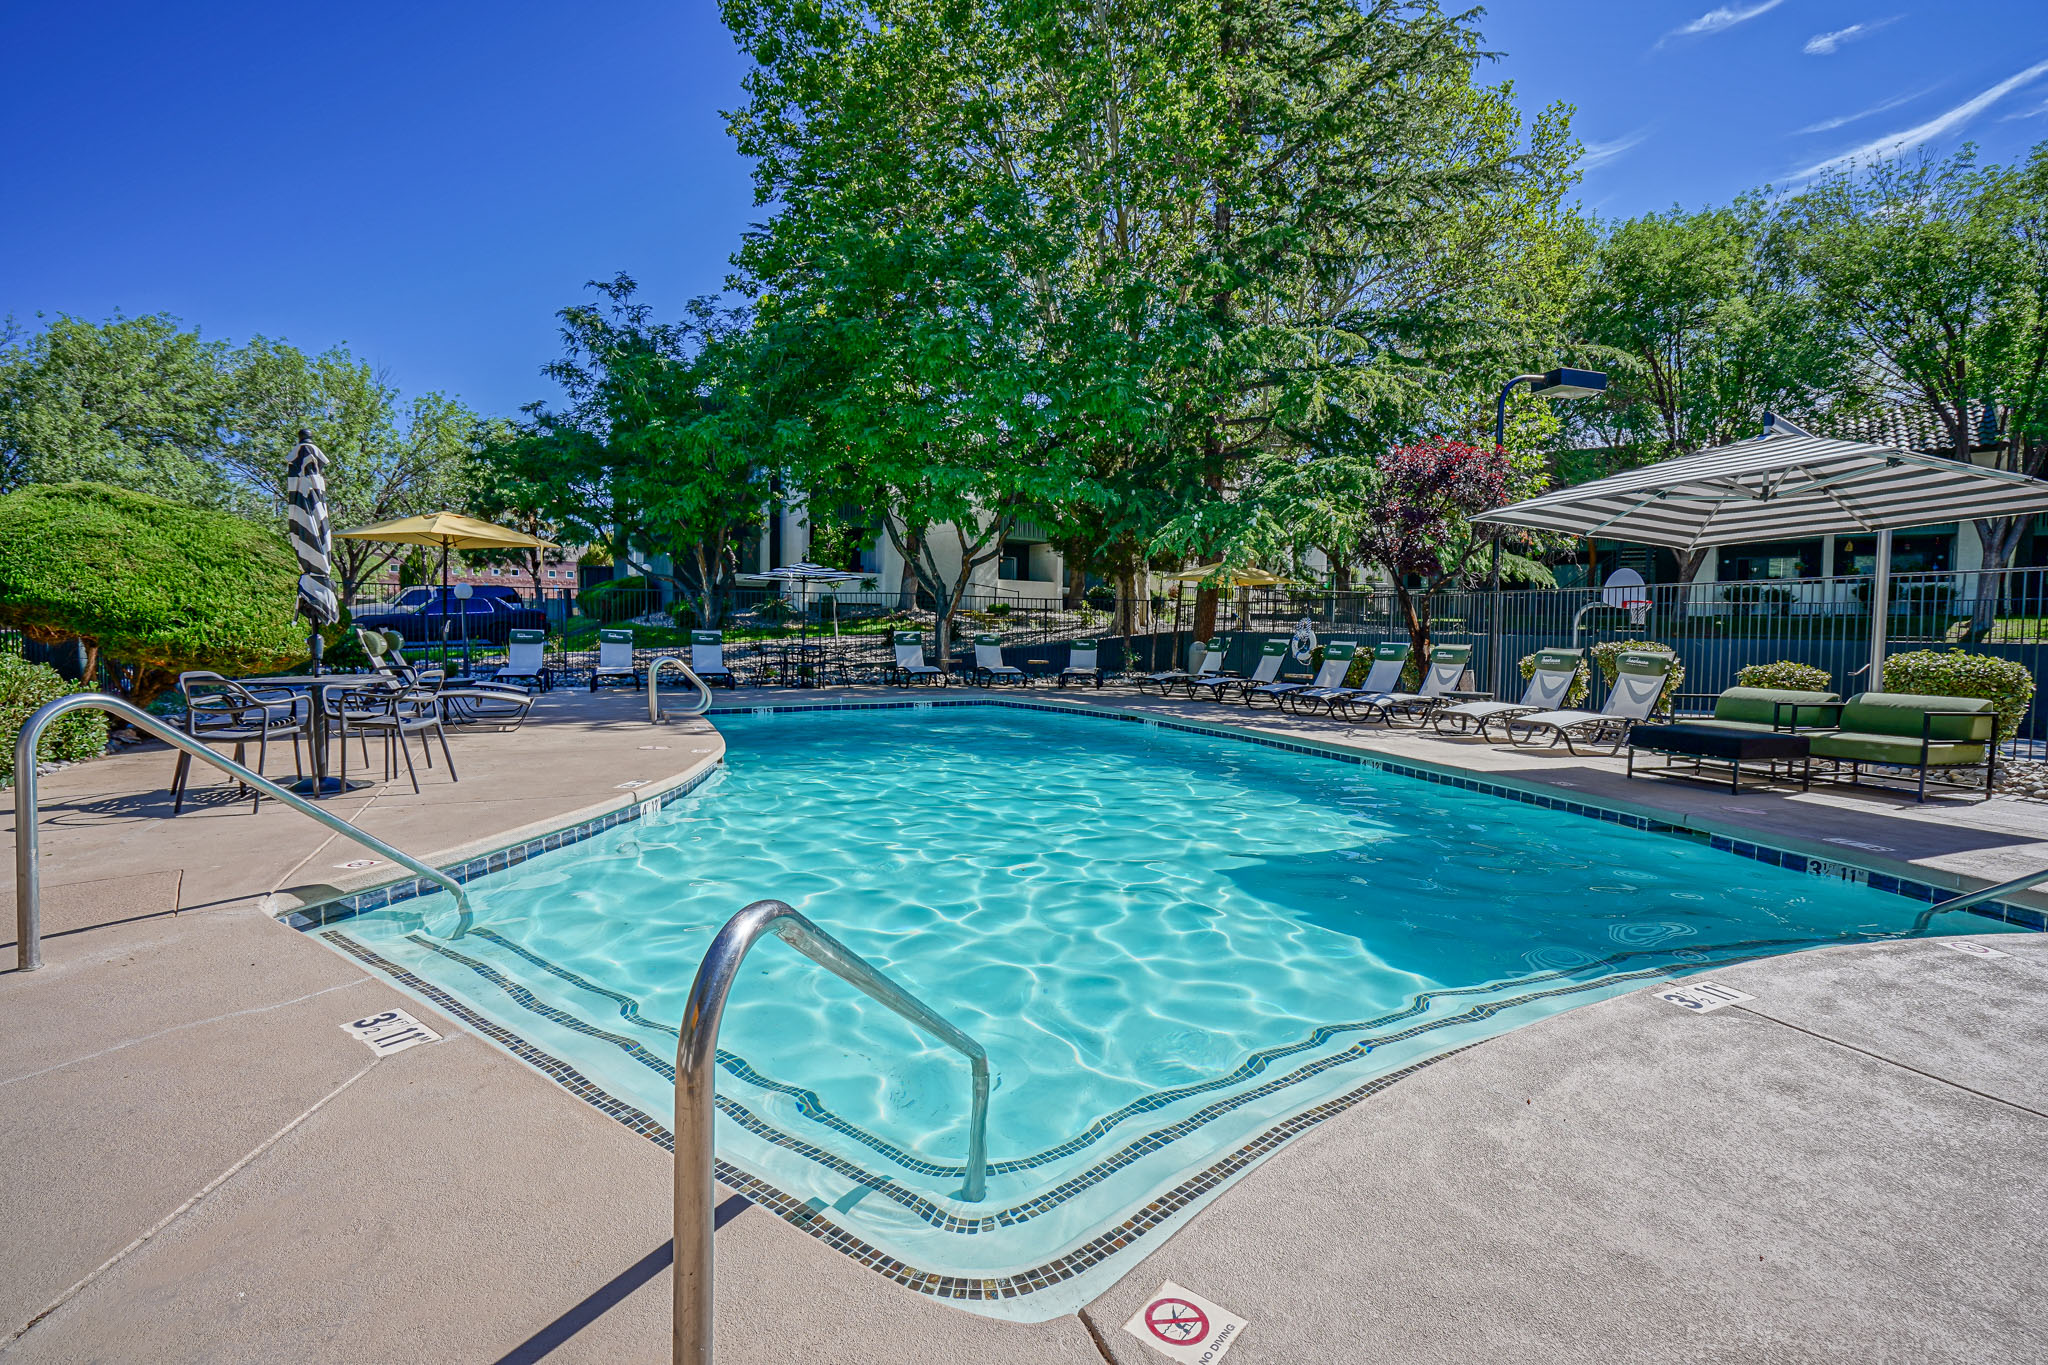 Swimming pool with resort-style furniture at Treehouse Apartments in Albuquerque, New Mexico